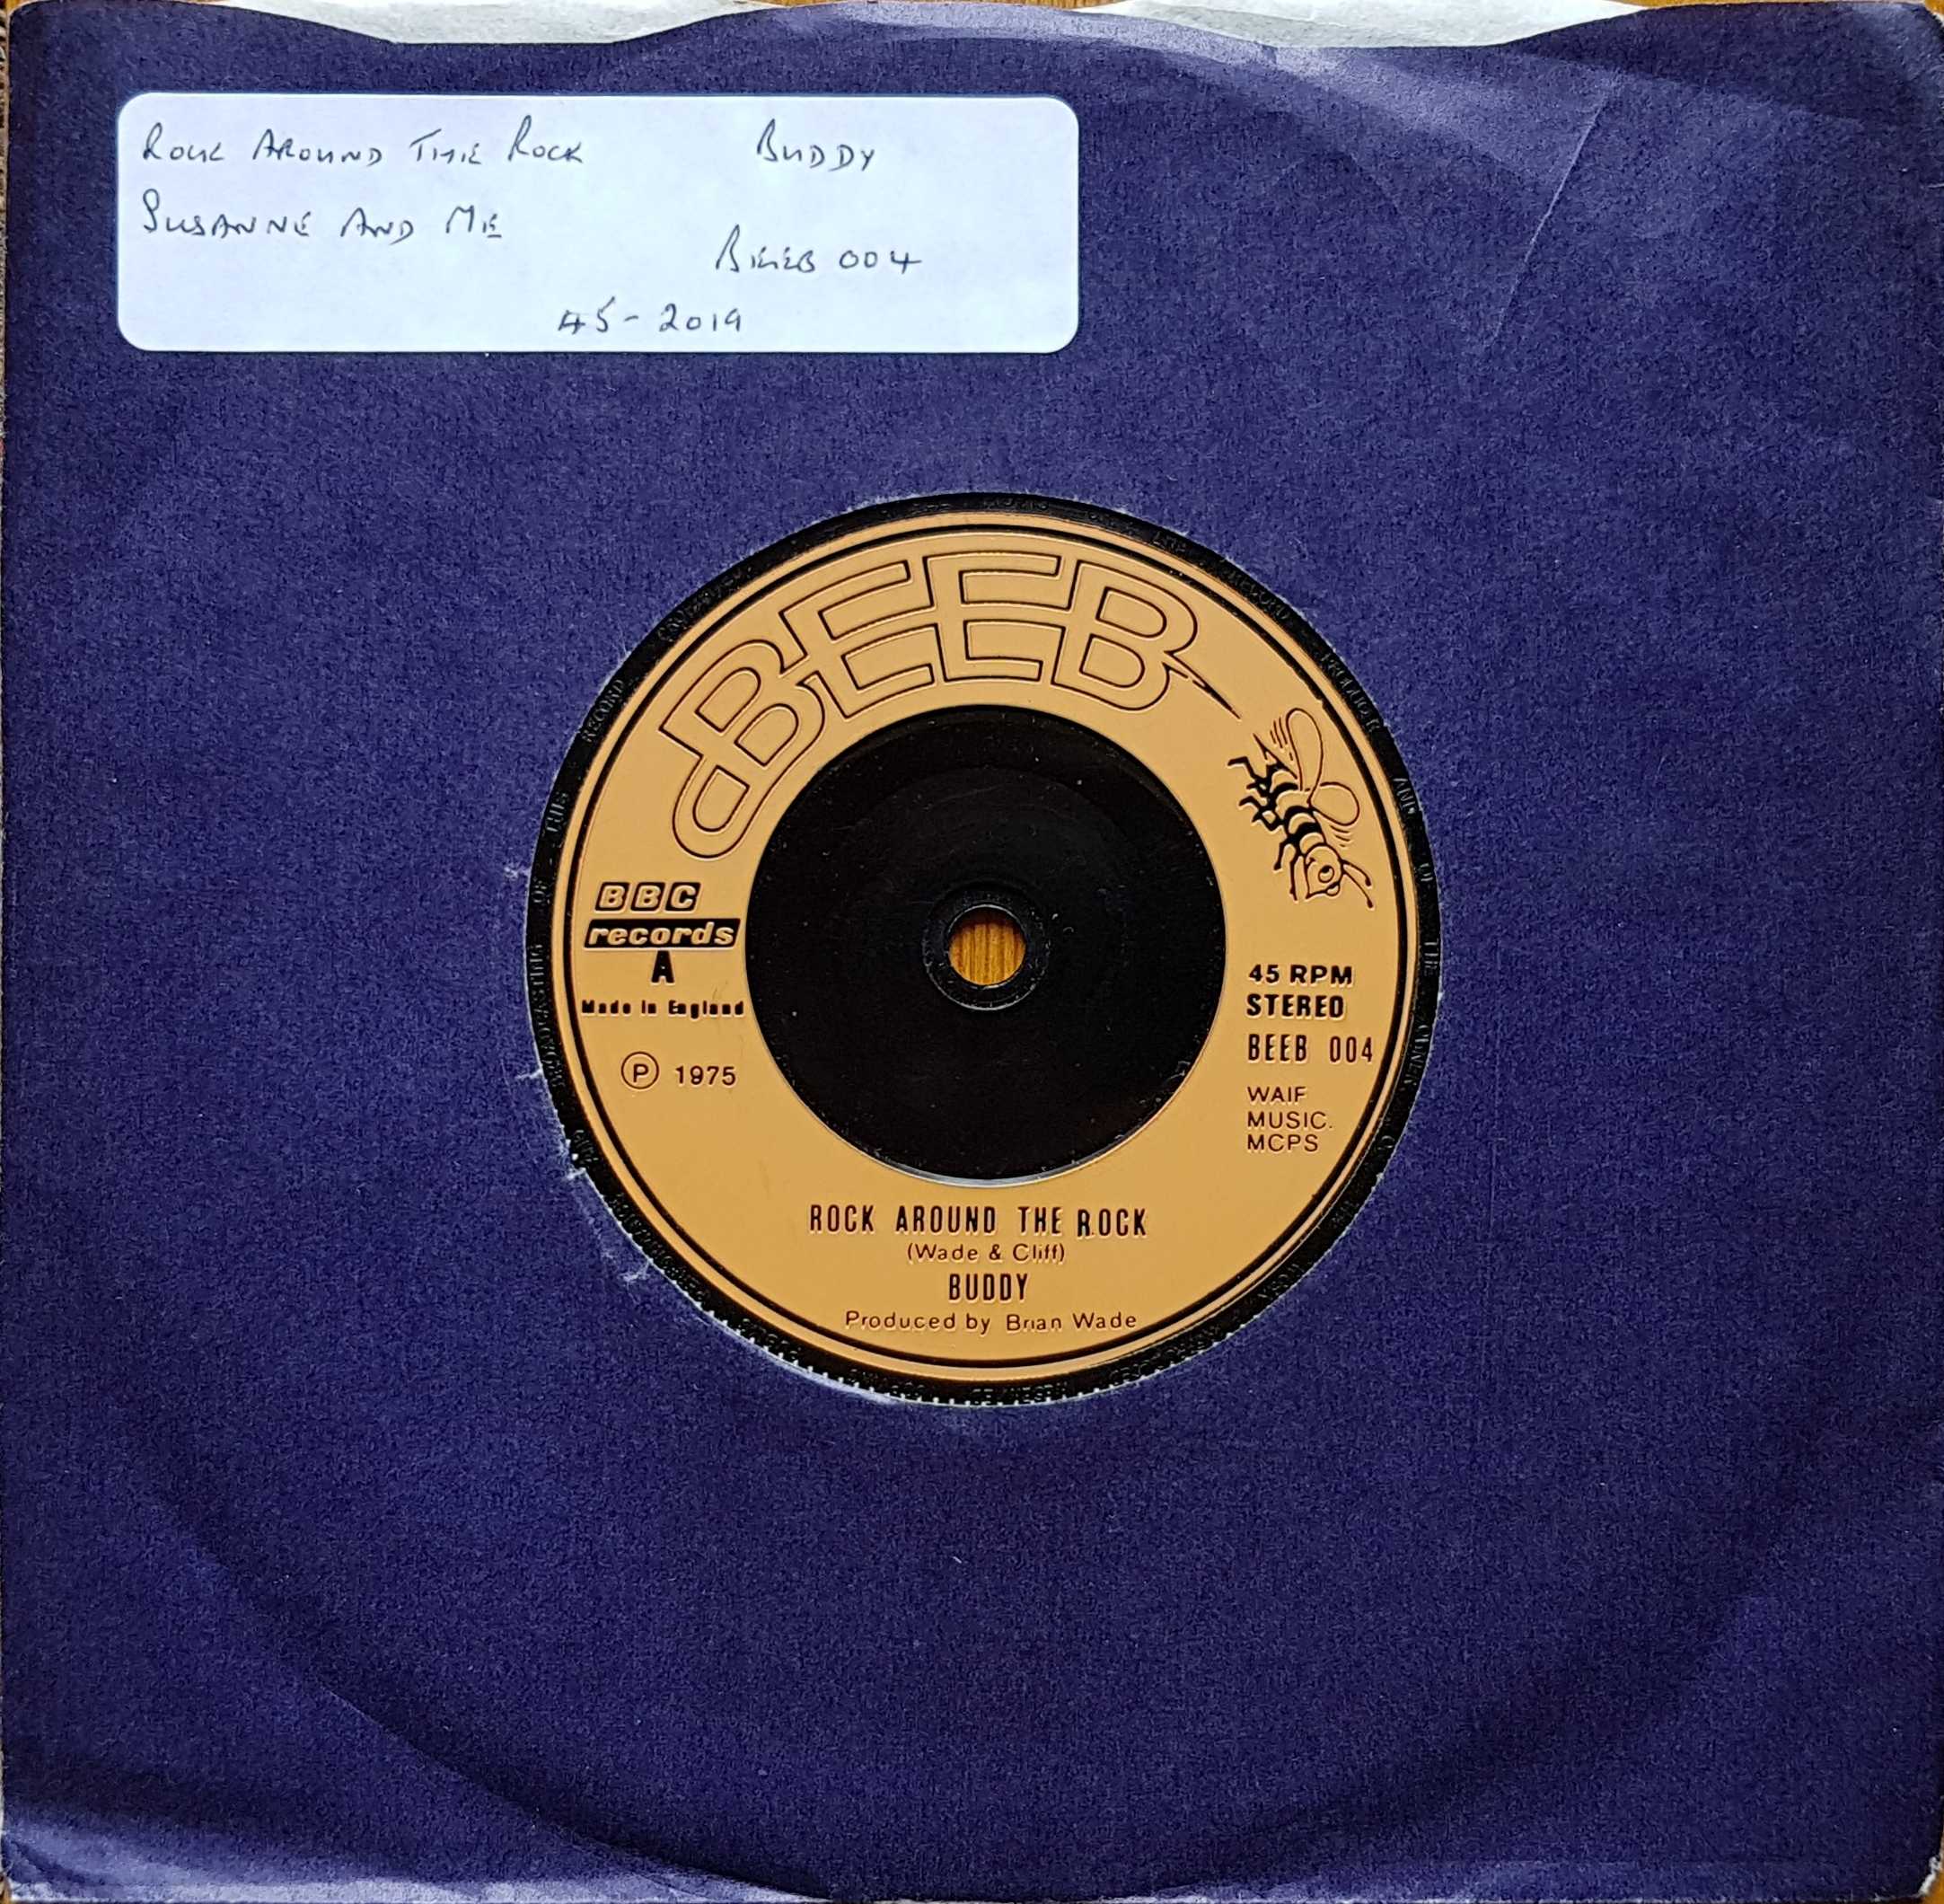 Picture of BEEB 004 Rock around the clock (Looking for Clancy) by artist Brian Wade / Tony Cliff / Buddy from the BBC singles - Records and Tapes library